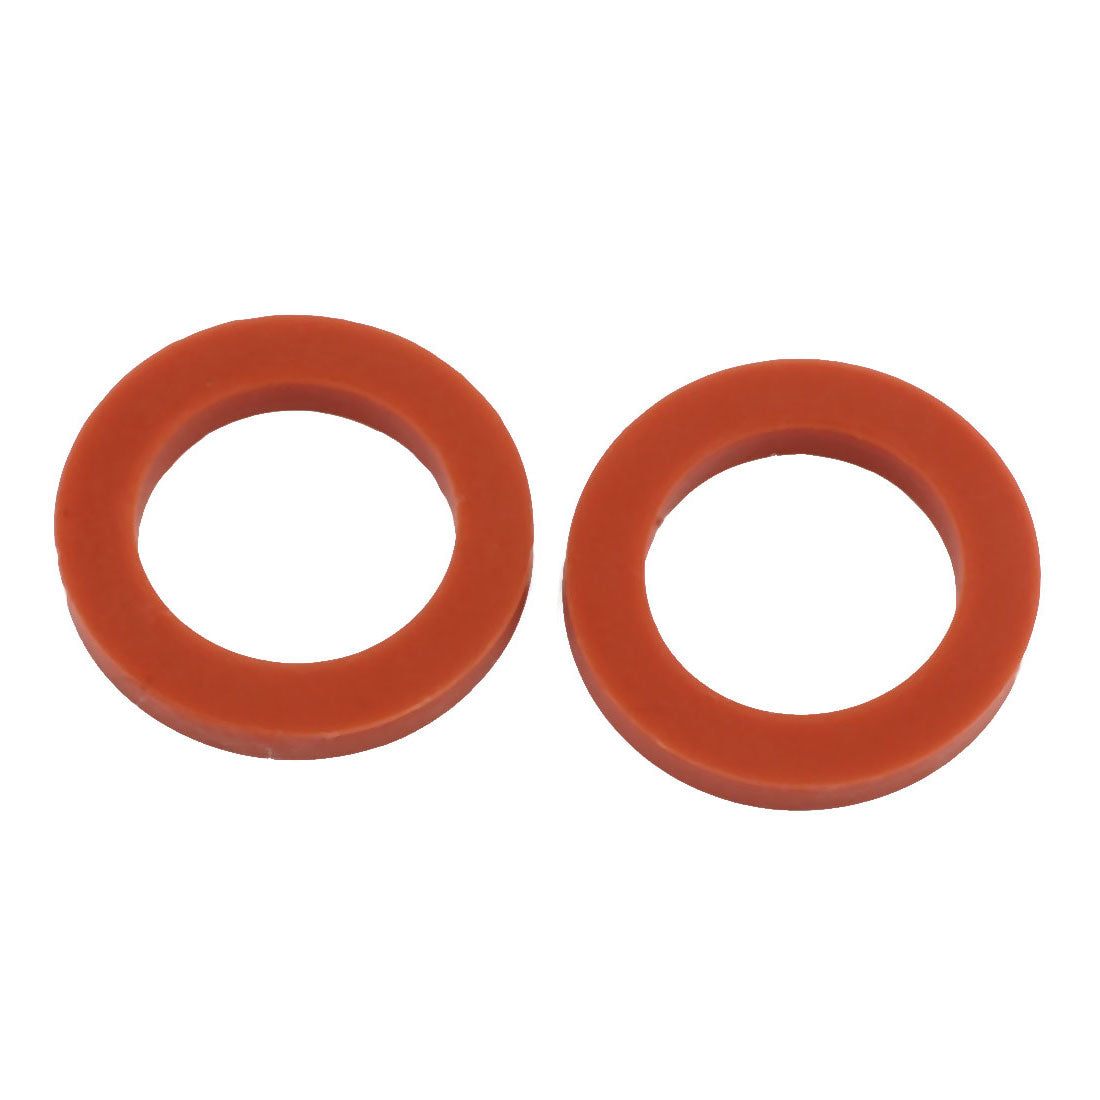 Uxcell Uxcell 5pcs 24mm x 16mm x 3mm Silicone O Ring Seal Gaskets Red for Pipe Tube Hose